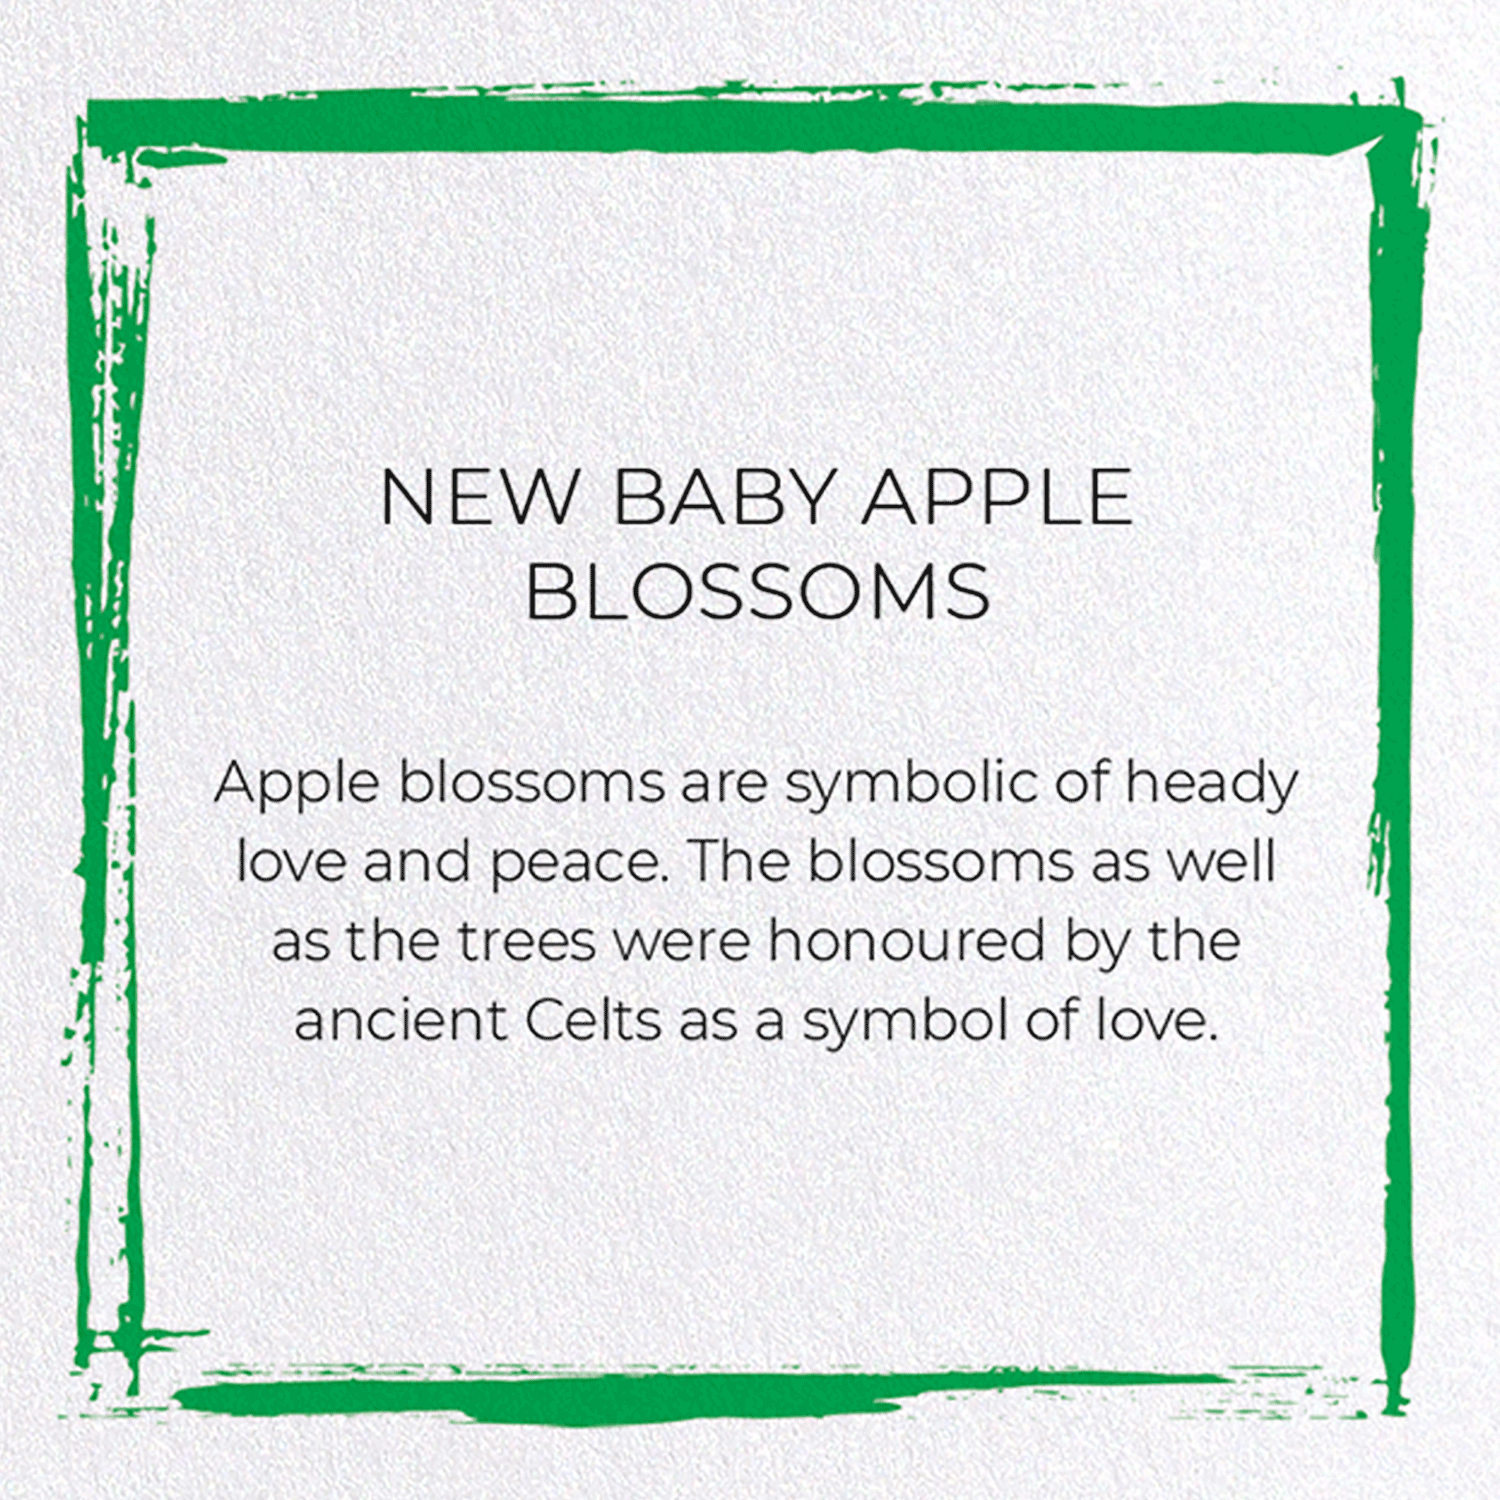 NEW BABY APPLE BLOSSOMS: Japanese Greeting Card